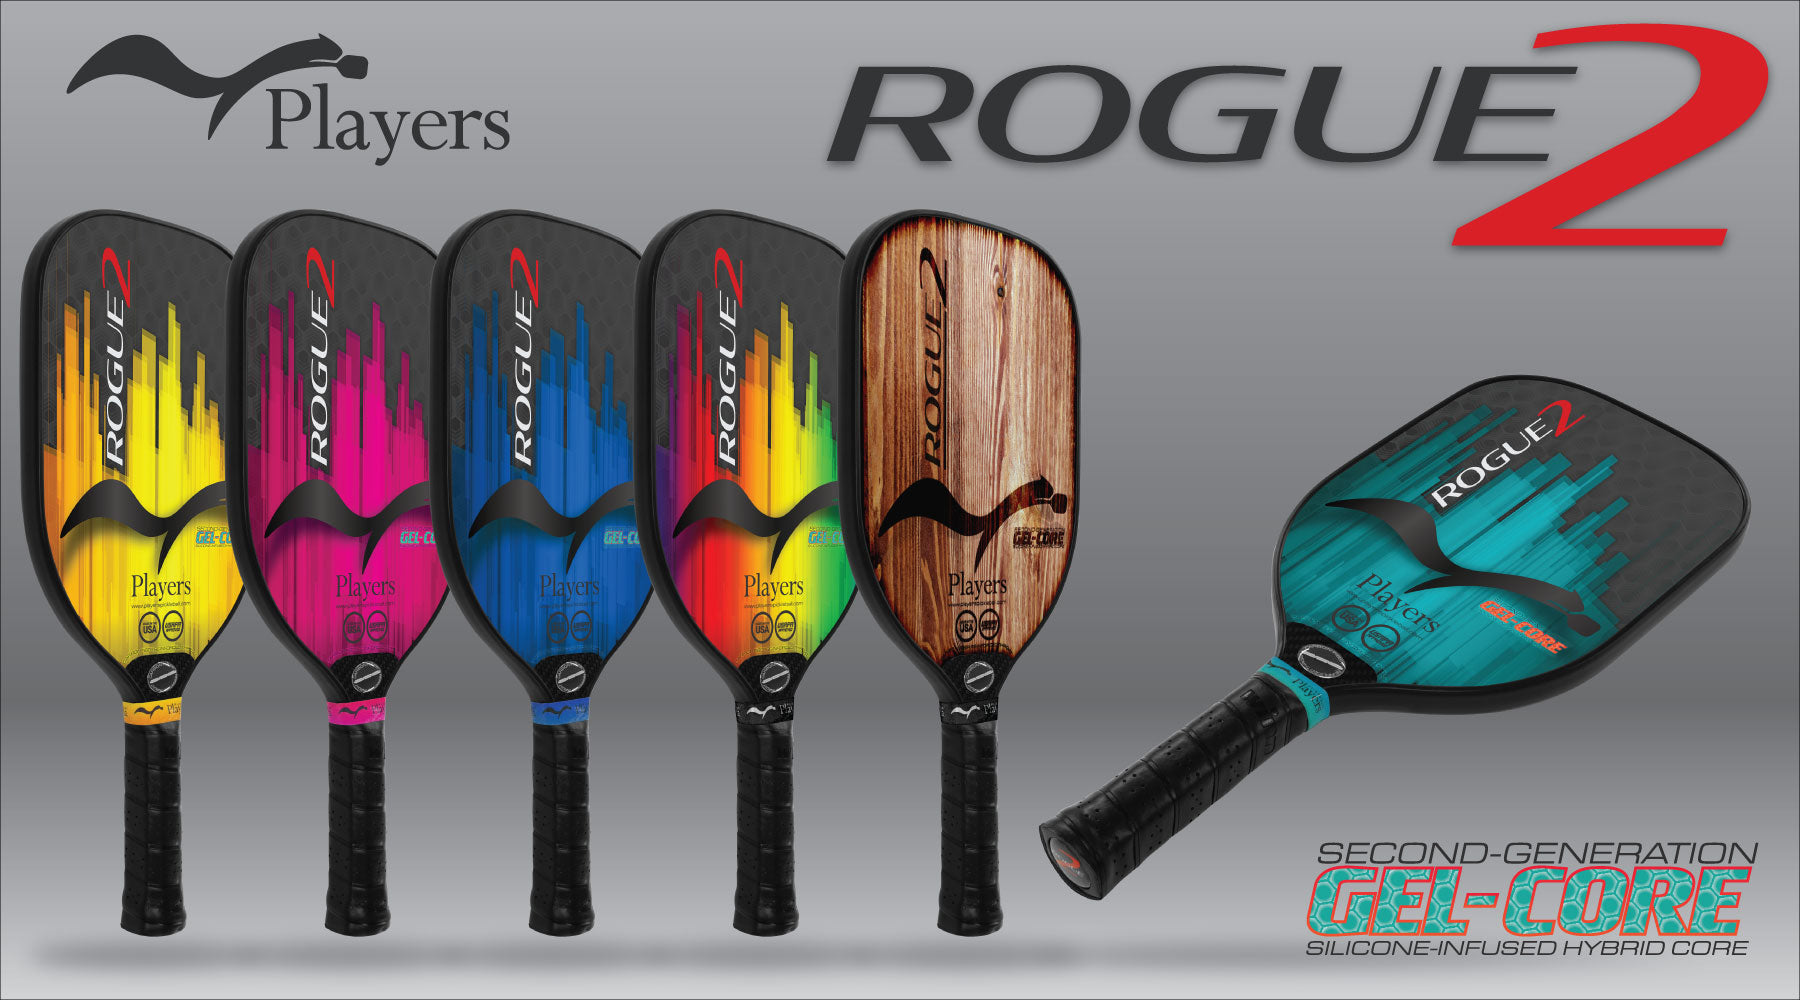 Introducing the all new Rogue2 2nd Generation Gel-Core Pickleball Paddle!